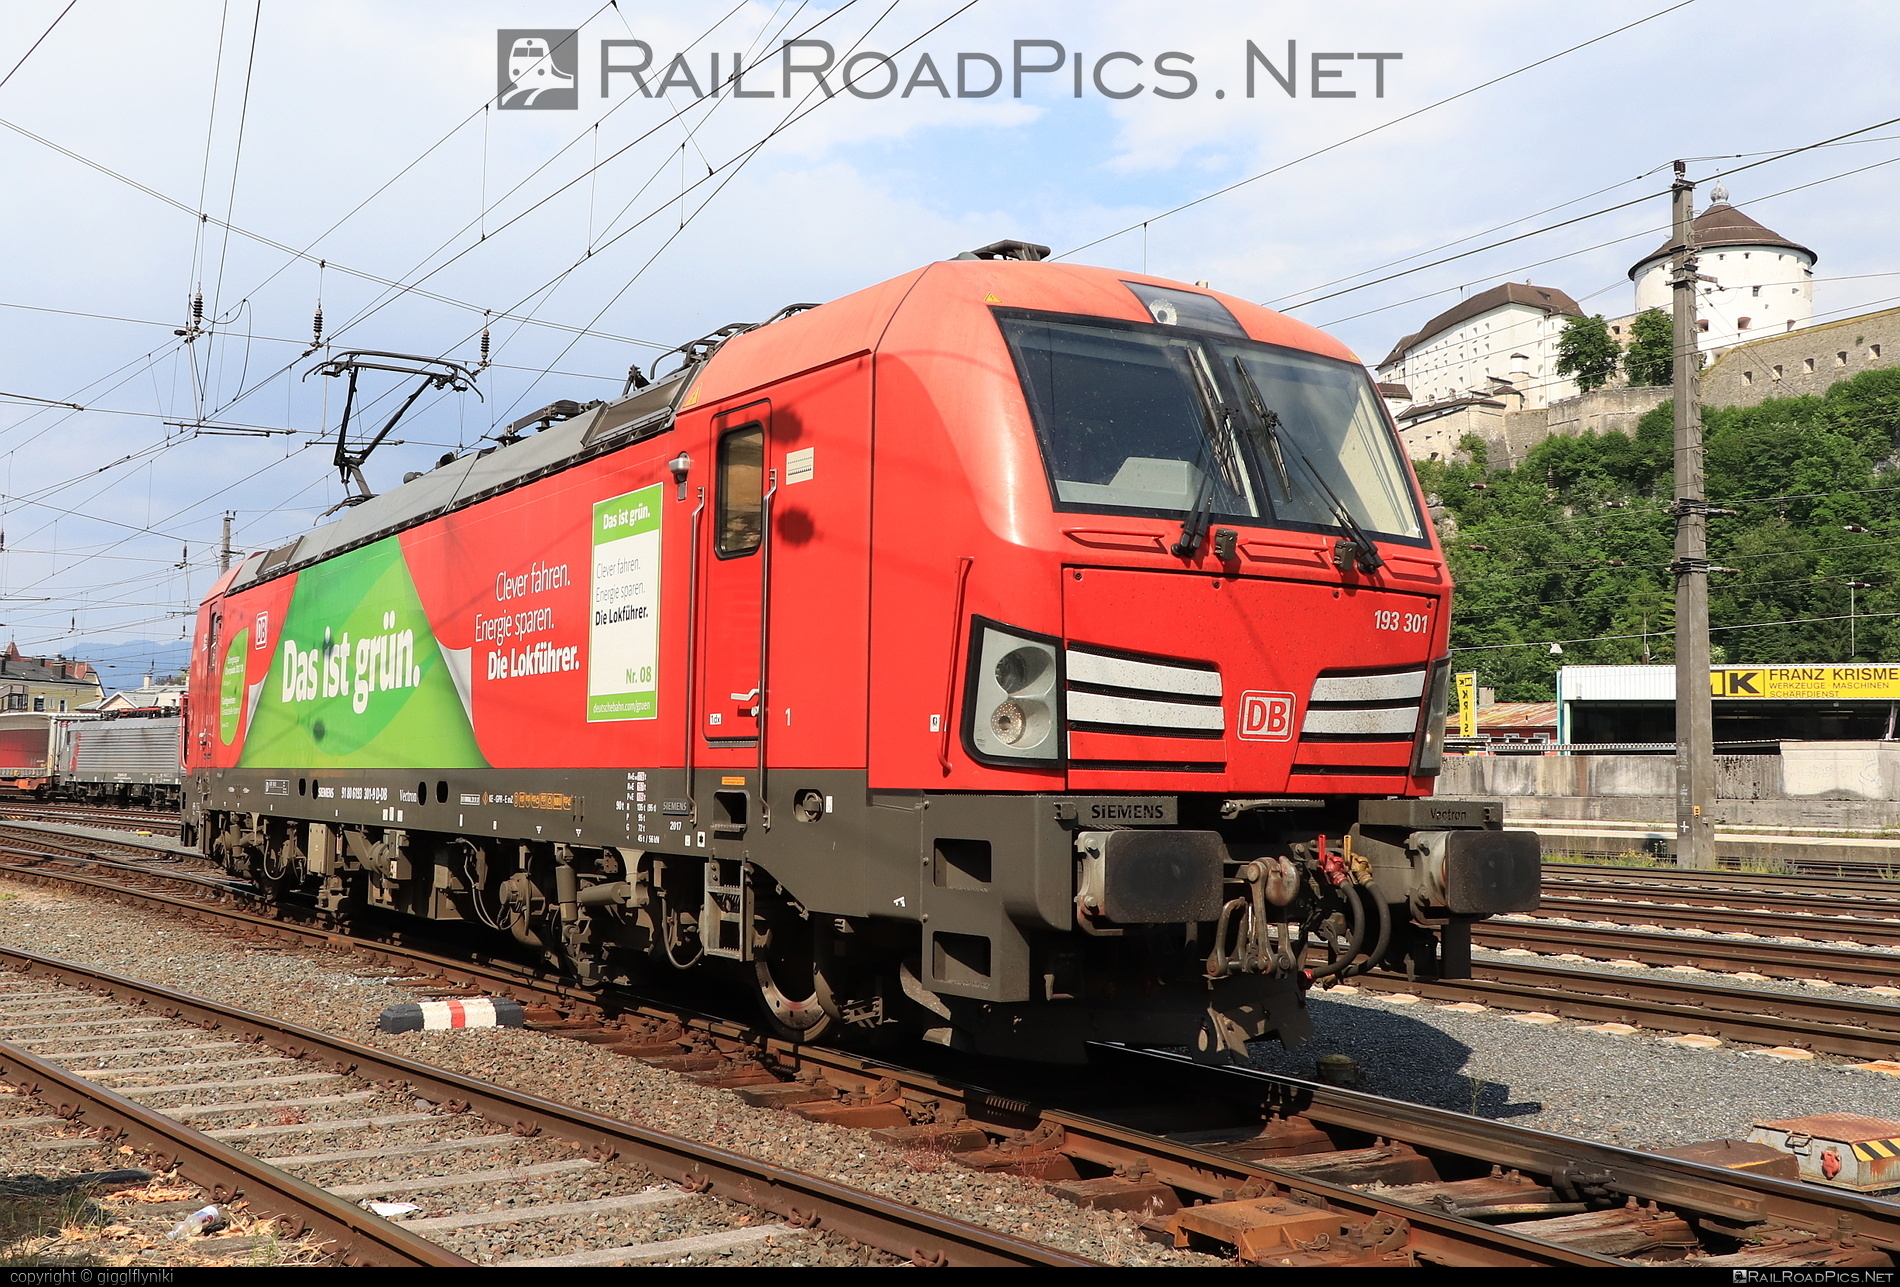 Siemens Vectron MS - 193 301 operated by DB Cargo AG #db #dbcargo #dbcargoag #deutschebahn #siemens #siemensVectron #siemensVectronMS #vectron #vectronMS